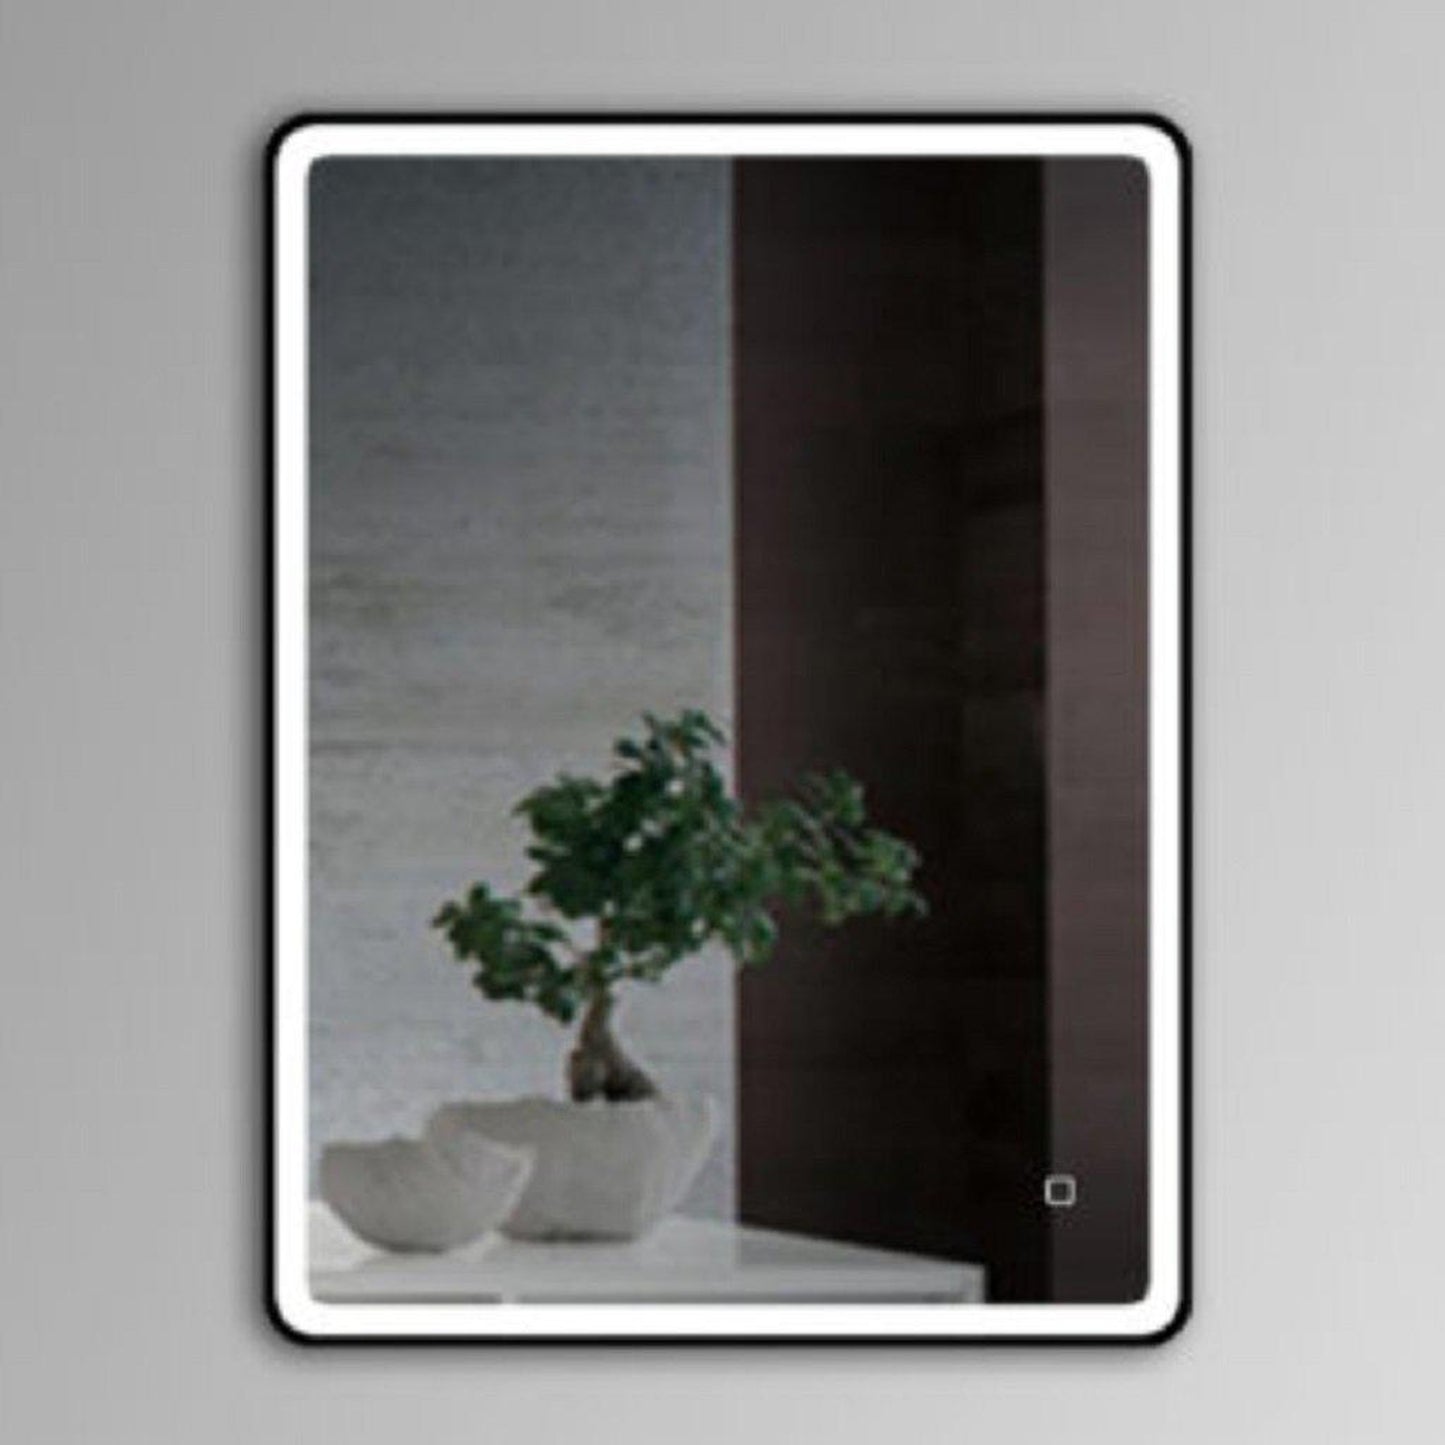 Lighted Impressions Belmar 30" x 36" Rectangular Framed Wall-Mounted LED Mirror With Dimmable Touch Sensor